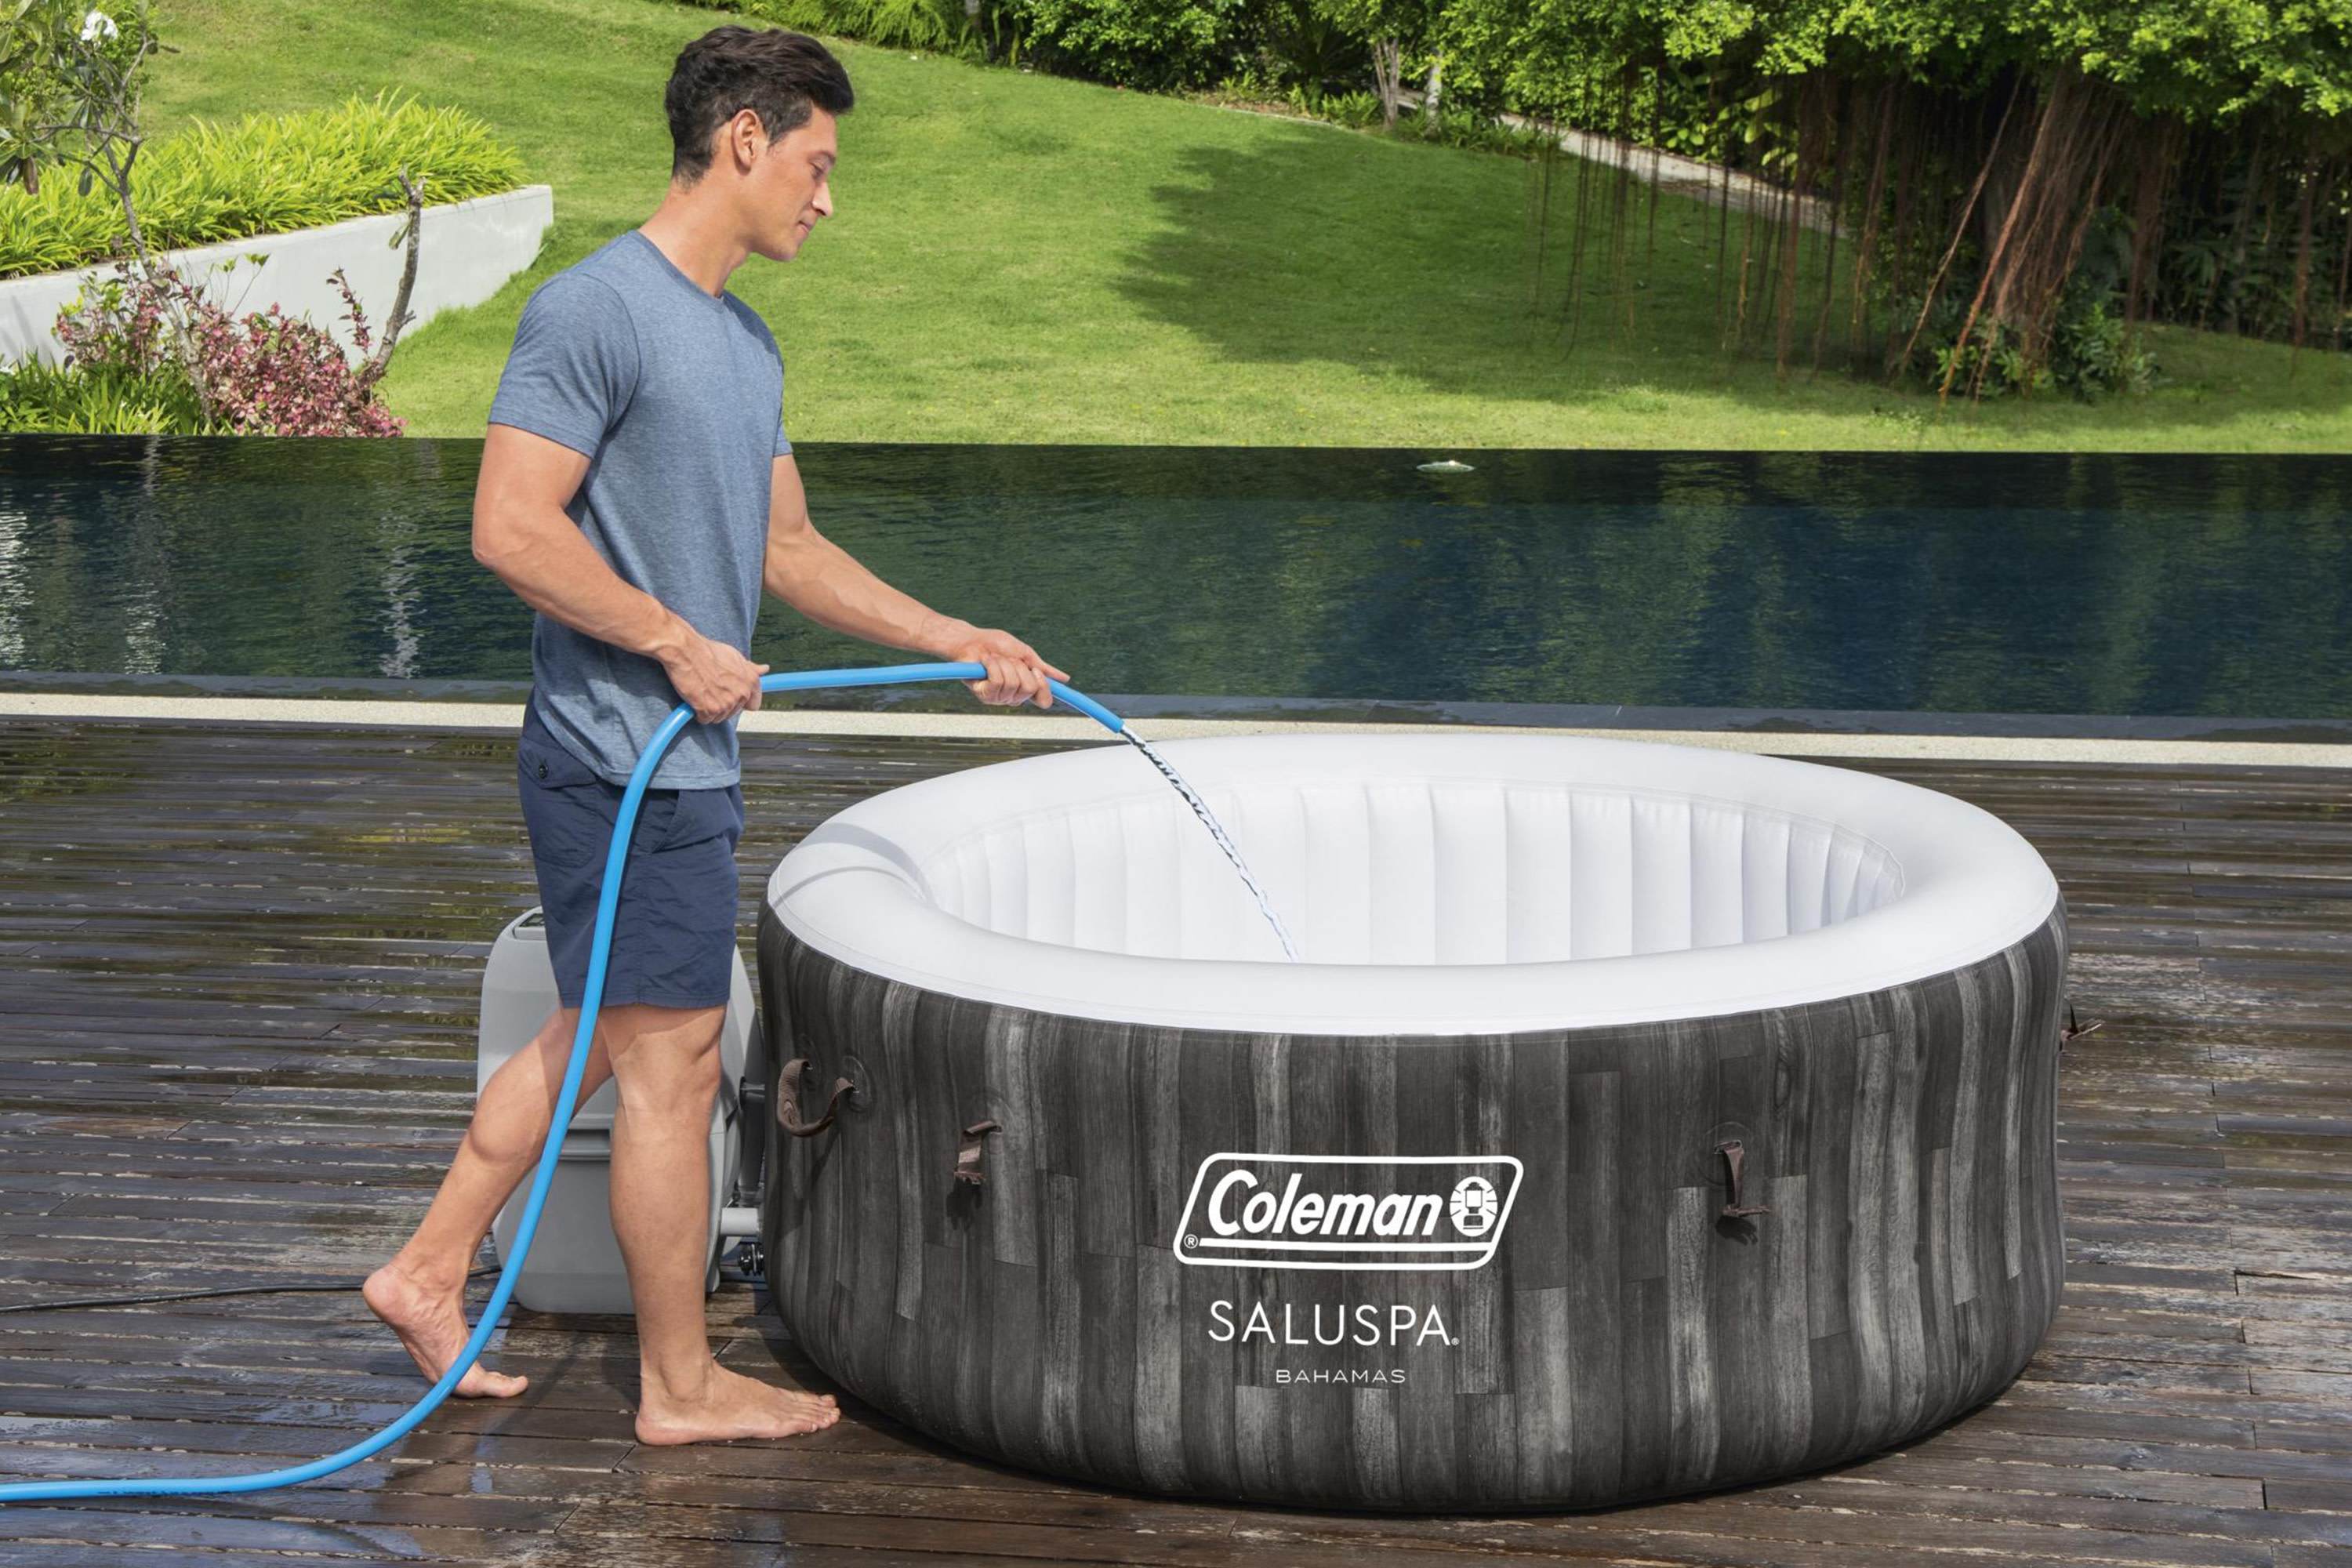 Coleman 71" x 26" Bahamas AirJet Spa Outdoor 177 gal. Spring Inflatable Hot Tub, 104˚F - image 5 of 10